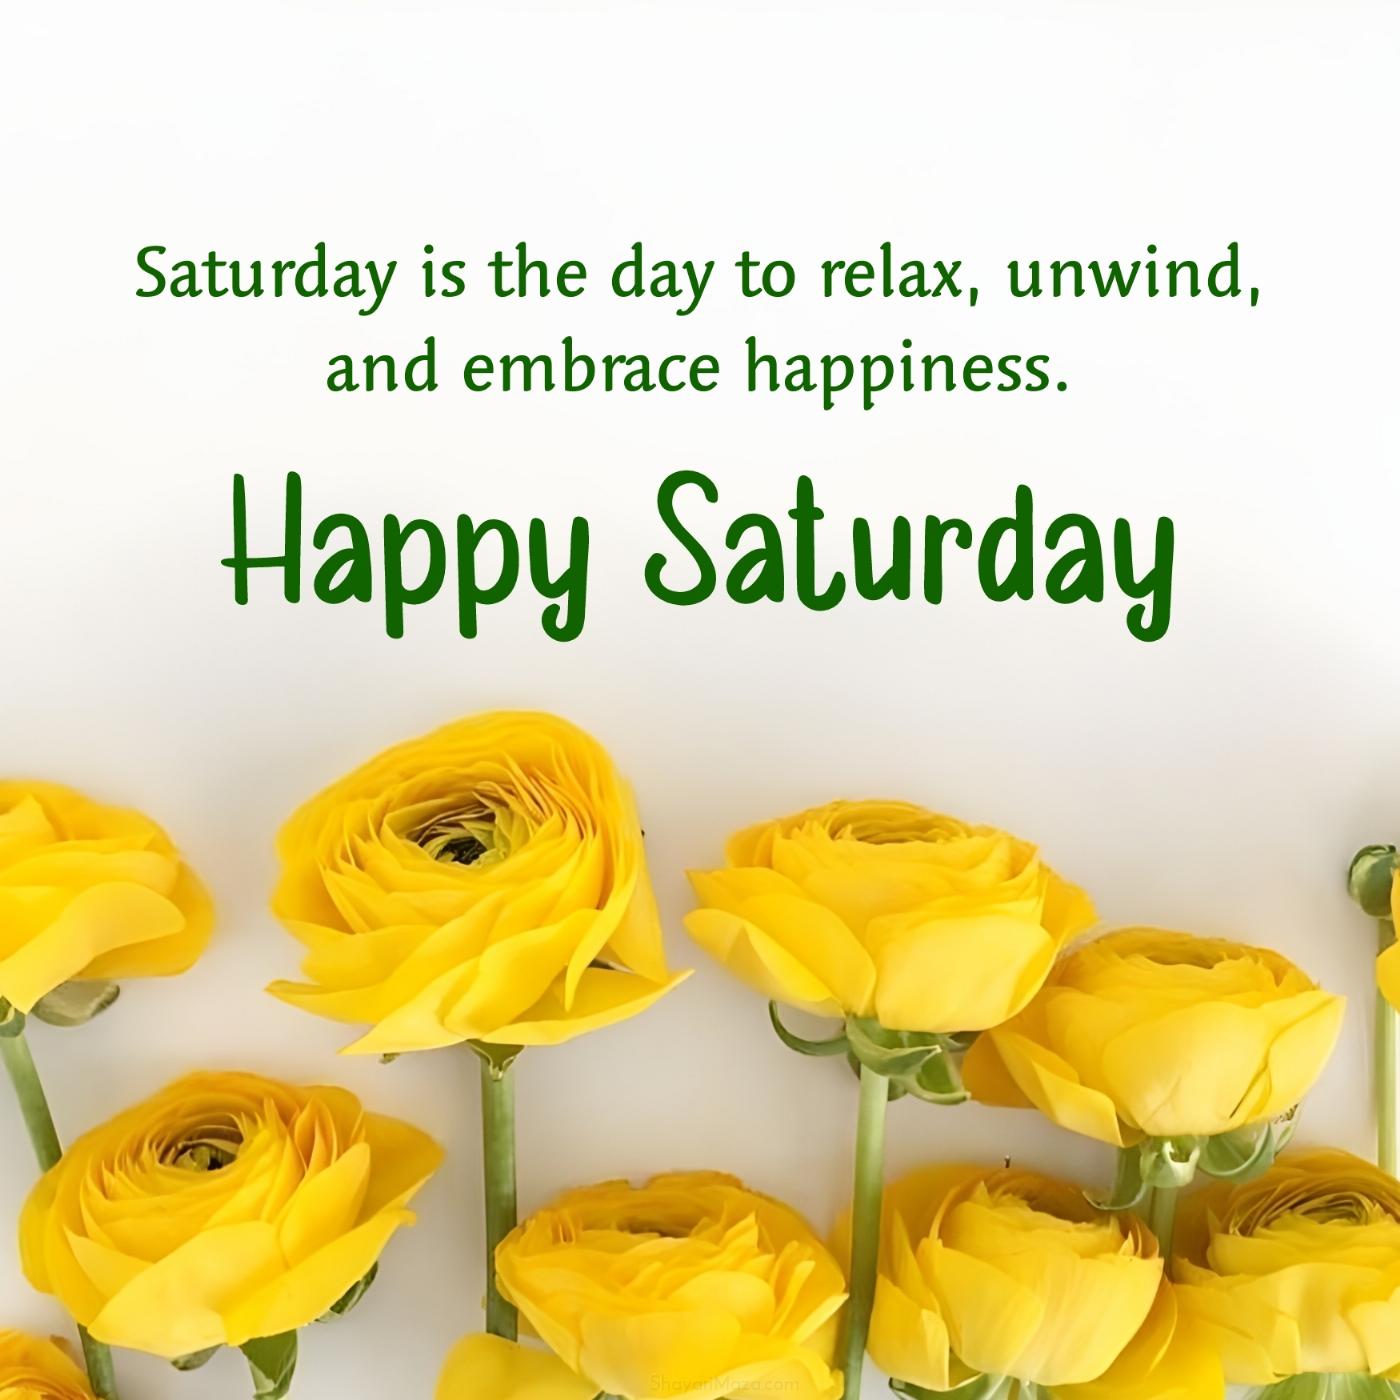 Saturday ia the day to relax unwind and embrace happiness